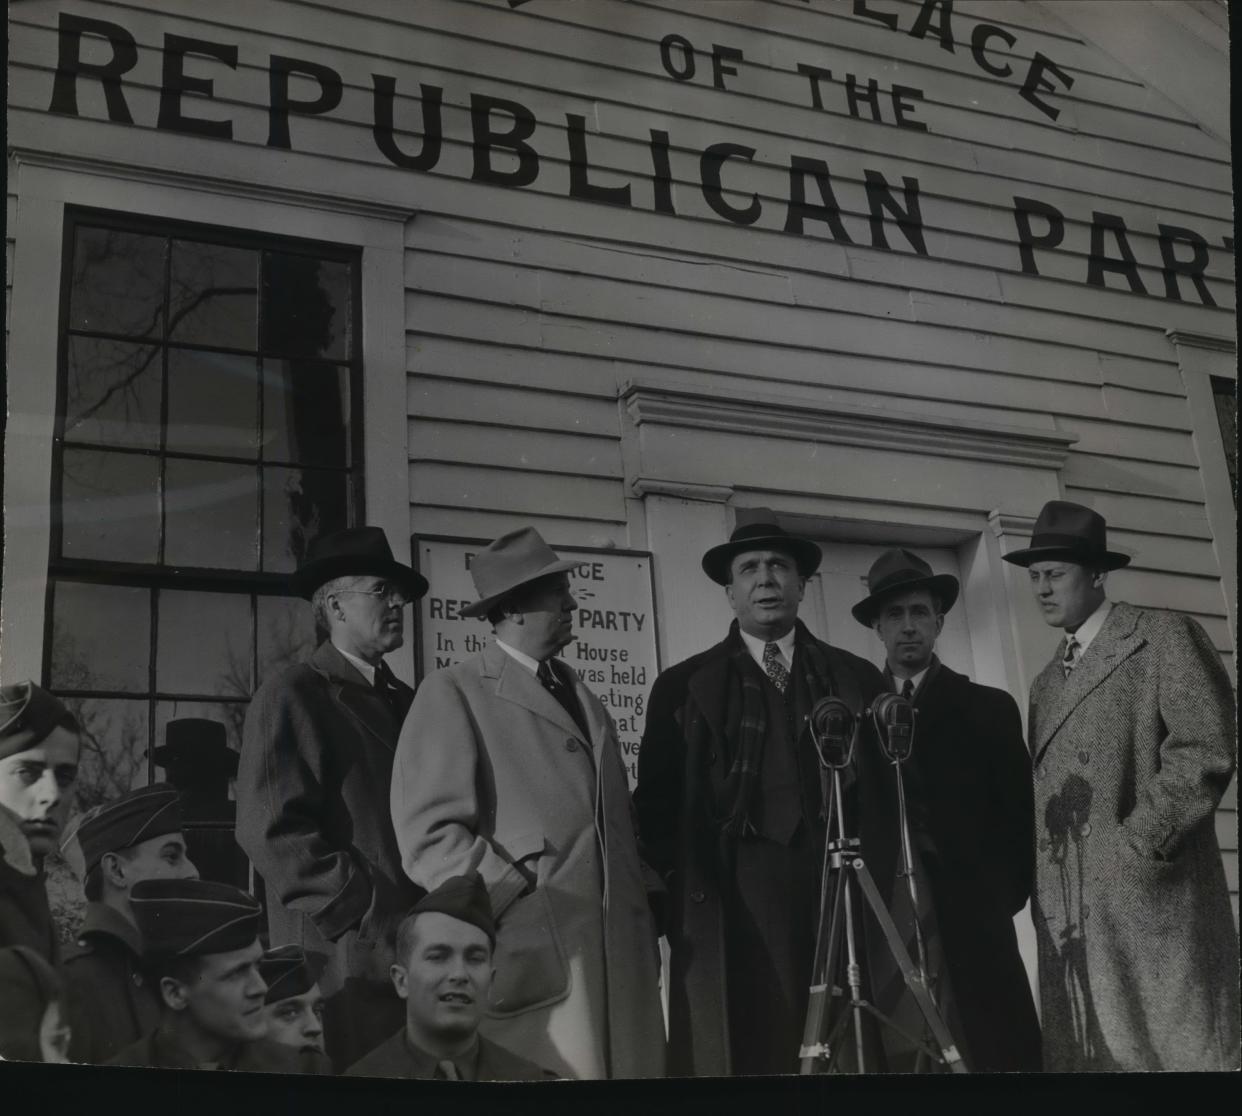 1940 Republican candidate for president Wendell Willkie (center, speaking into the microphone) speaks in front of the Little White Schoolhouse in Ripon on March 20, 1944. The Republican Party was founded in the schoolhouse in 1854.